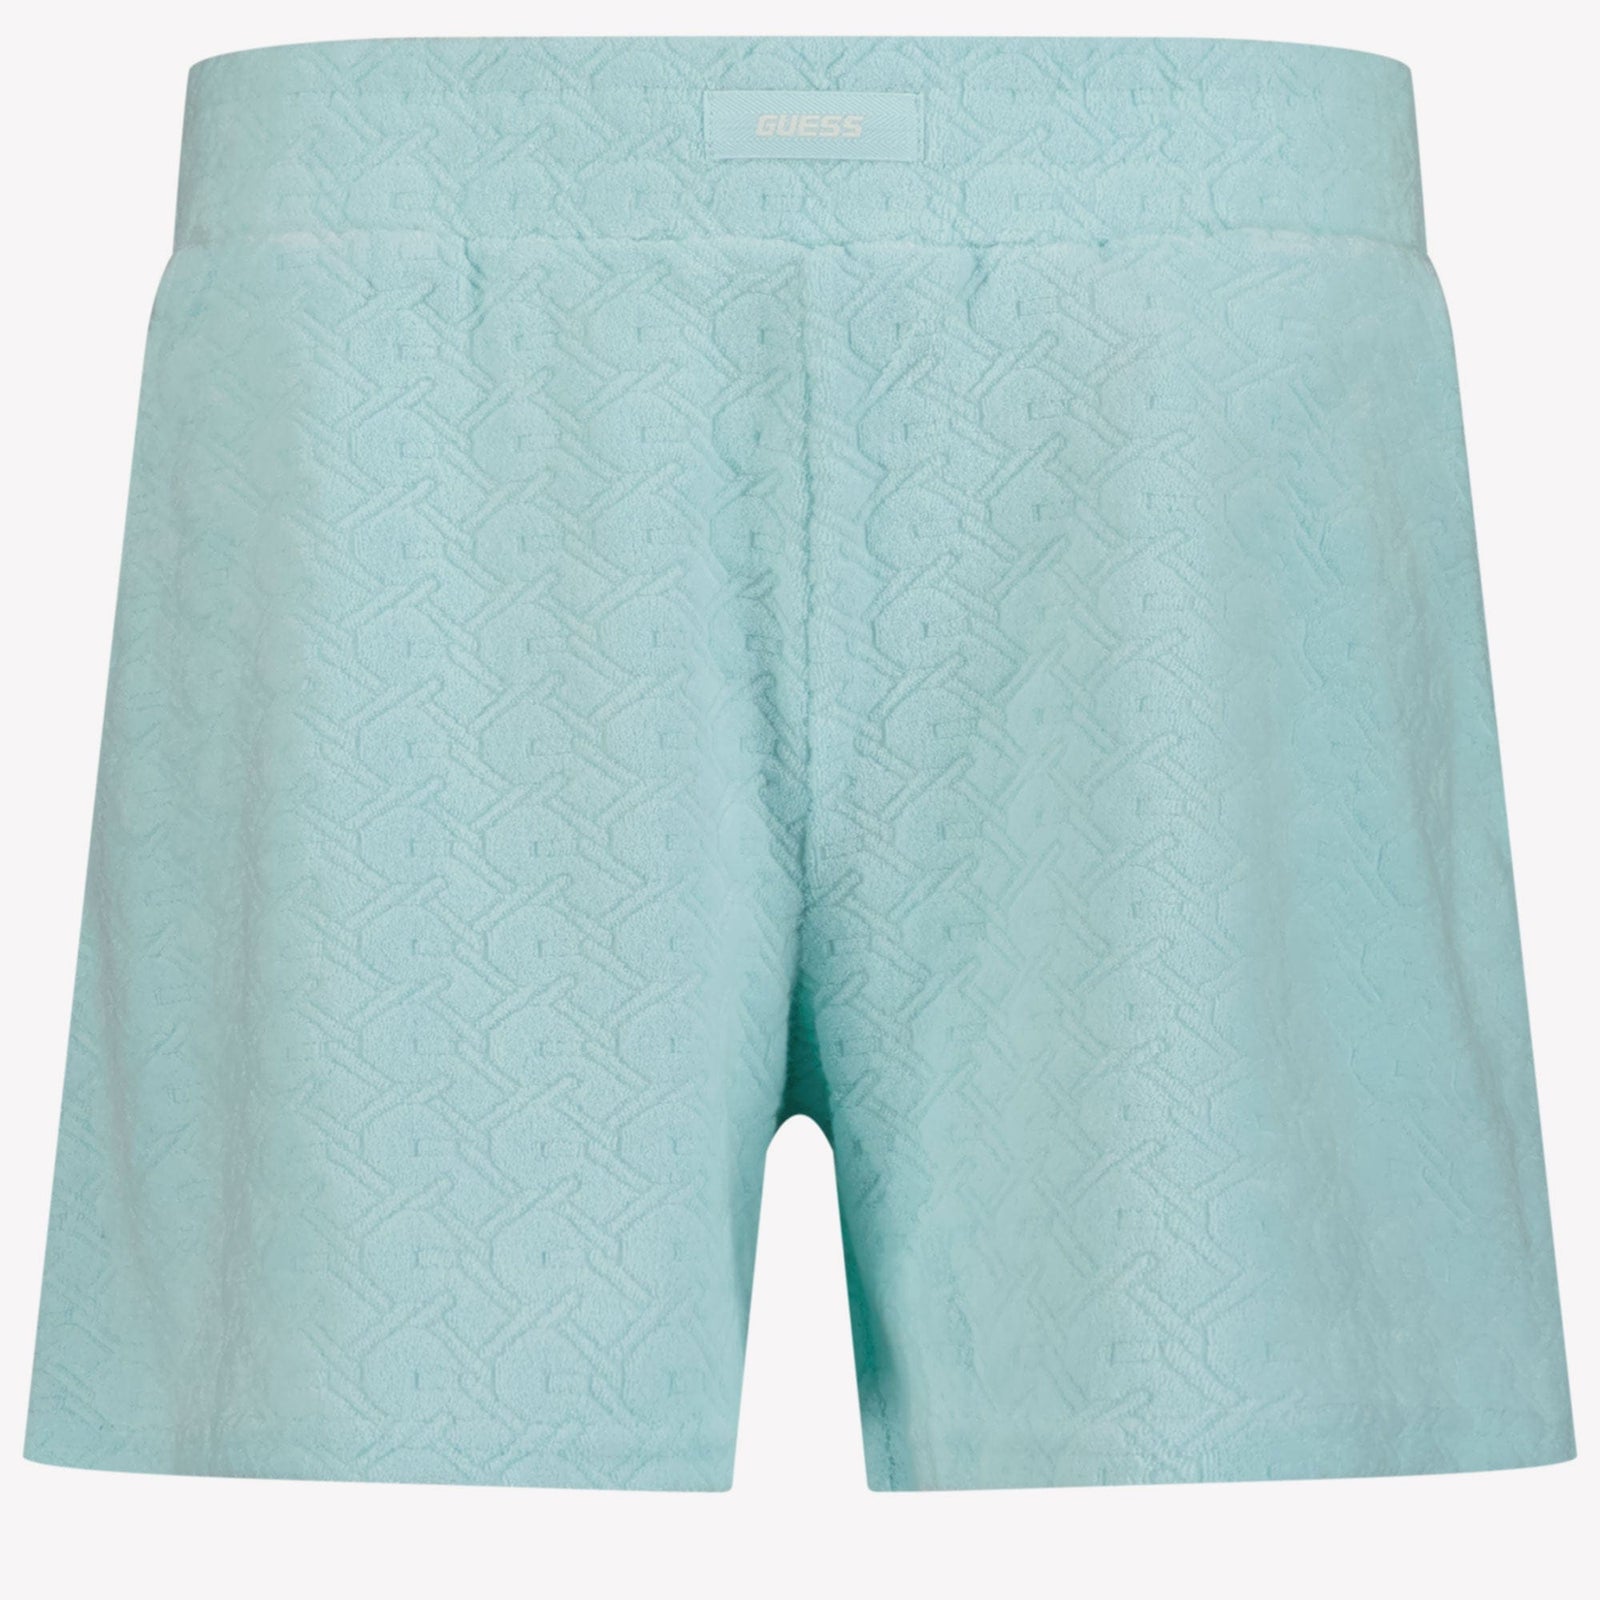 Guess Kinder Meisjes Shorts Turquoise 8Y